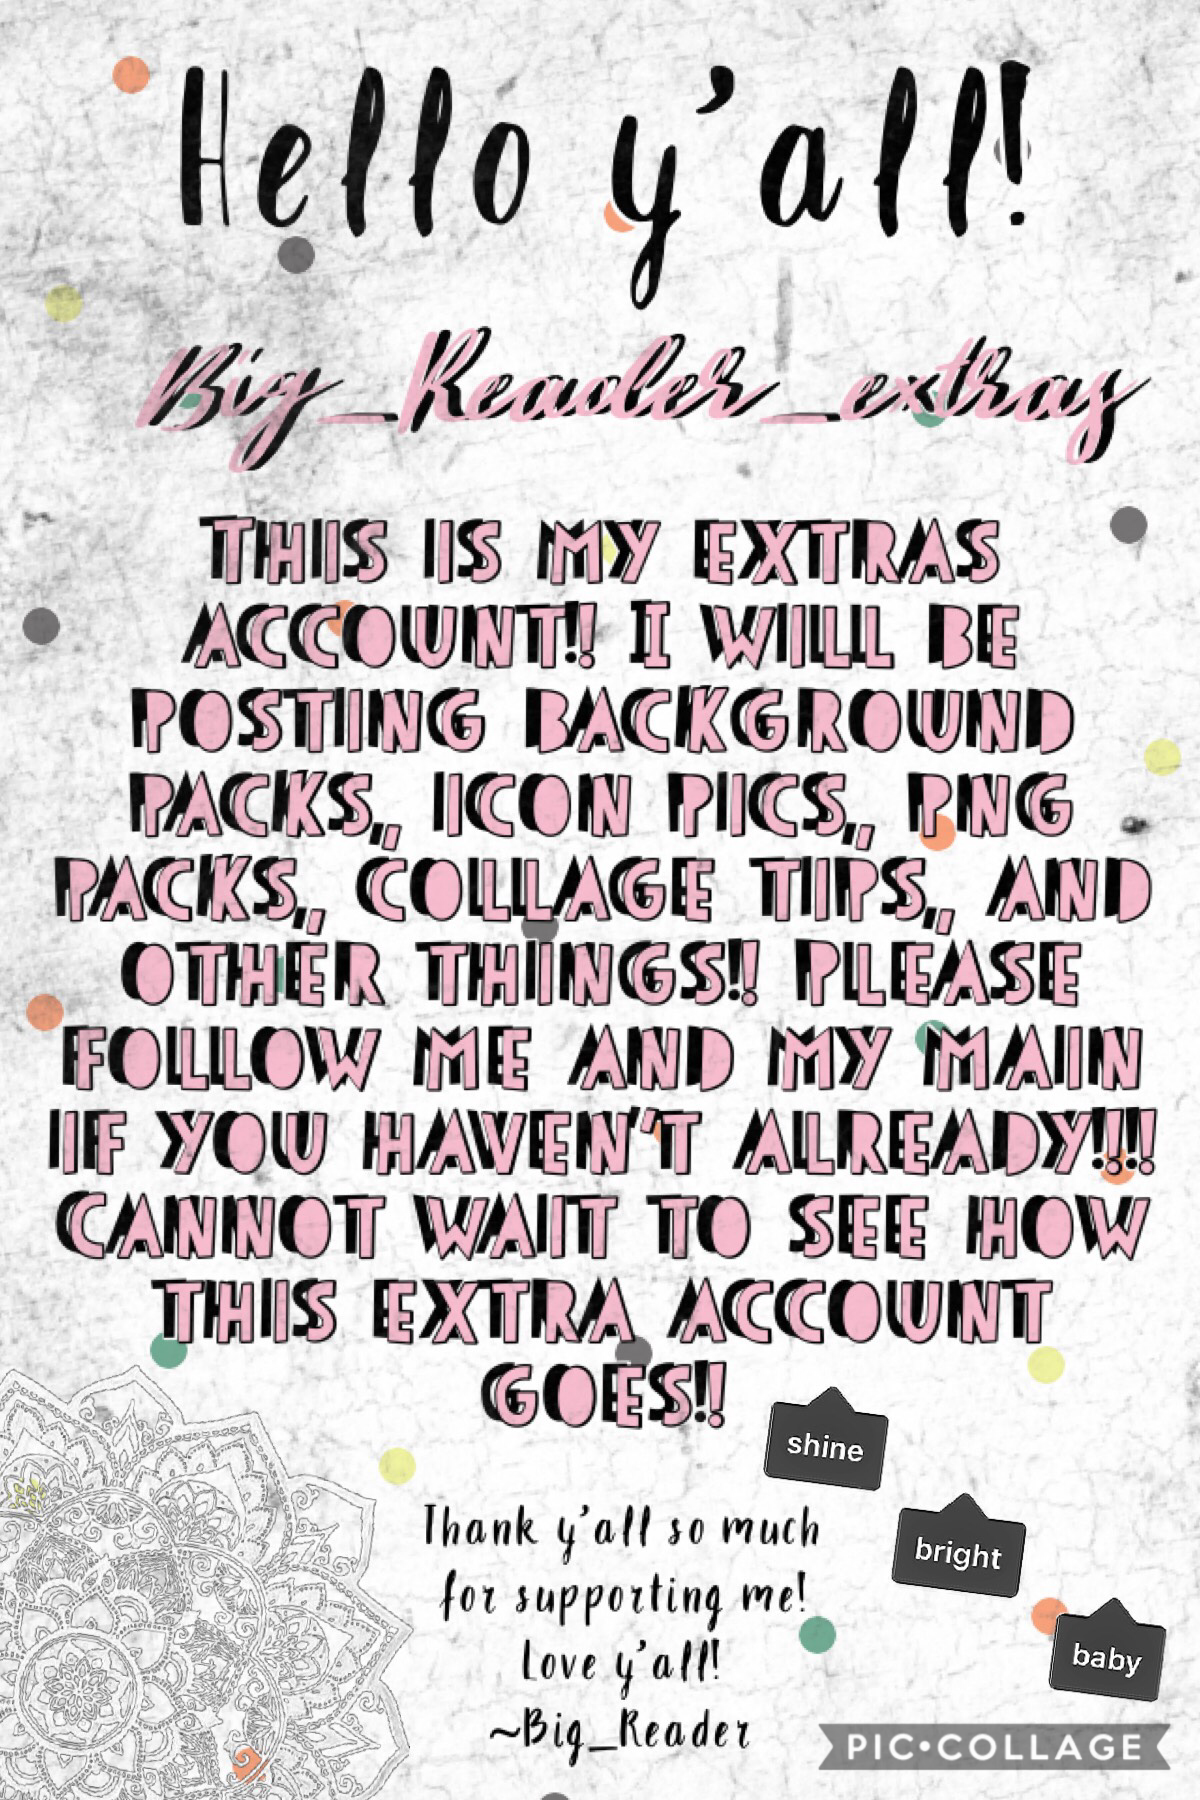 On one of my recent posts, I asked if I should have an extras account. I got many positive responses, so here it is!😂 Big_Reader_extras 😁💕💕